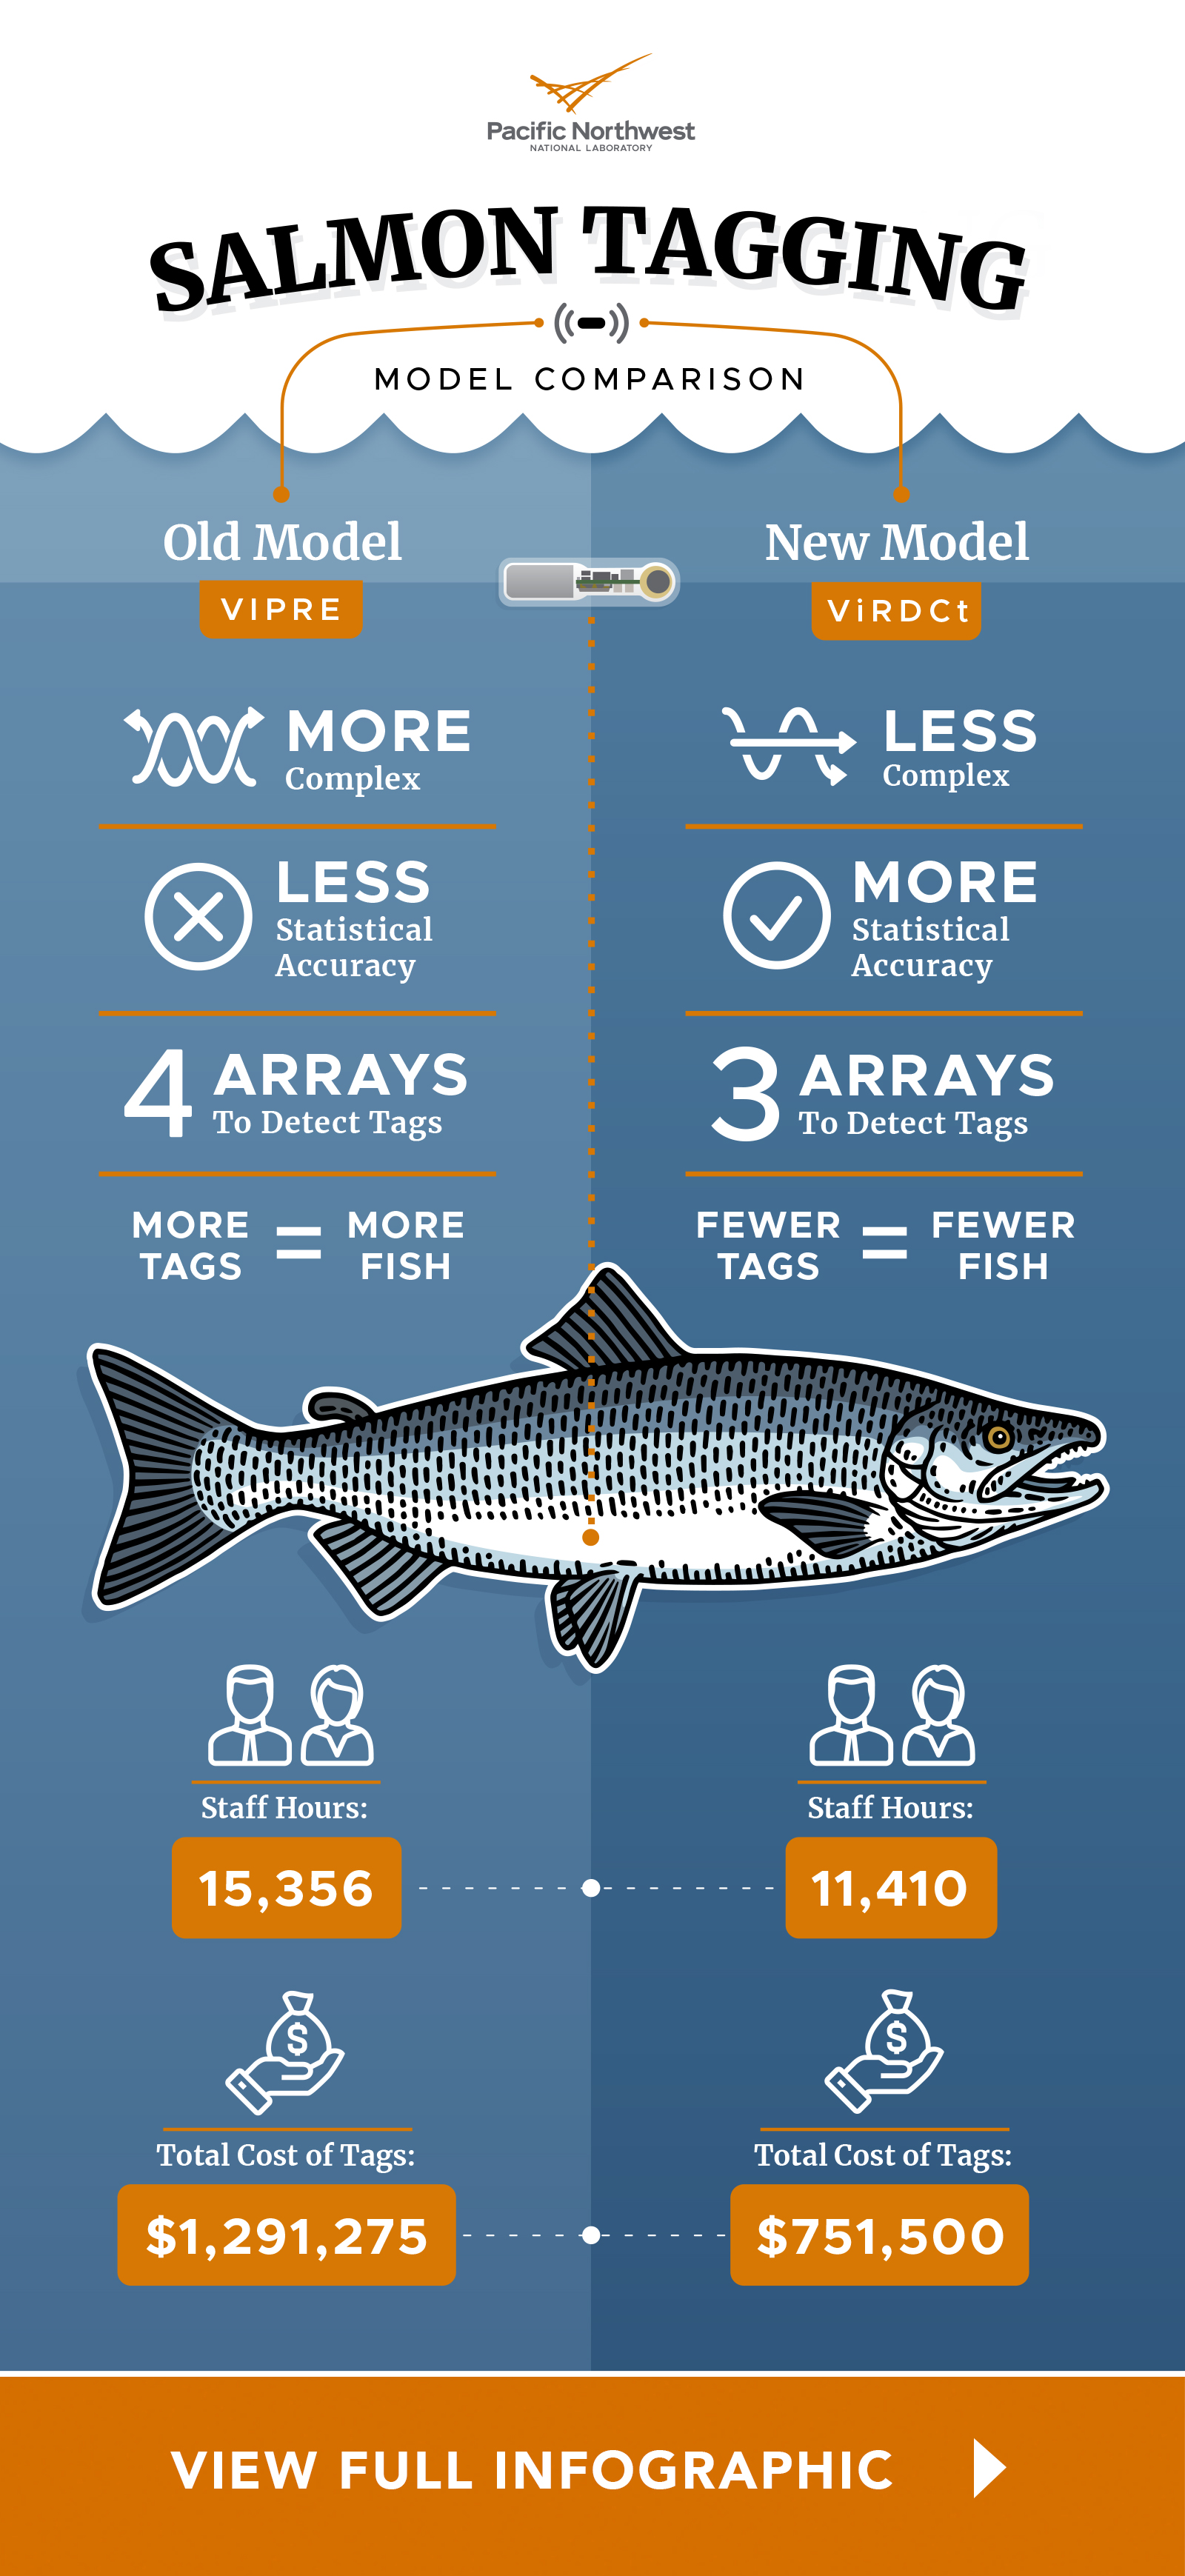 Salmon Tagging Infographic 2020